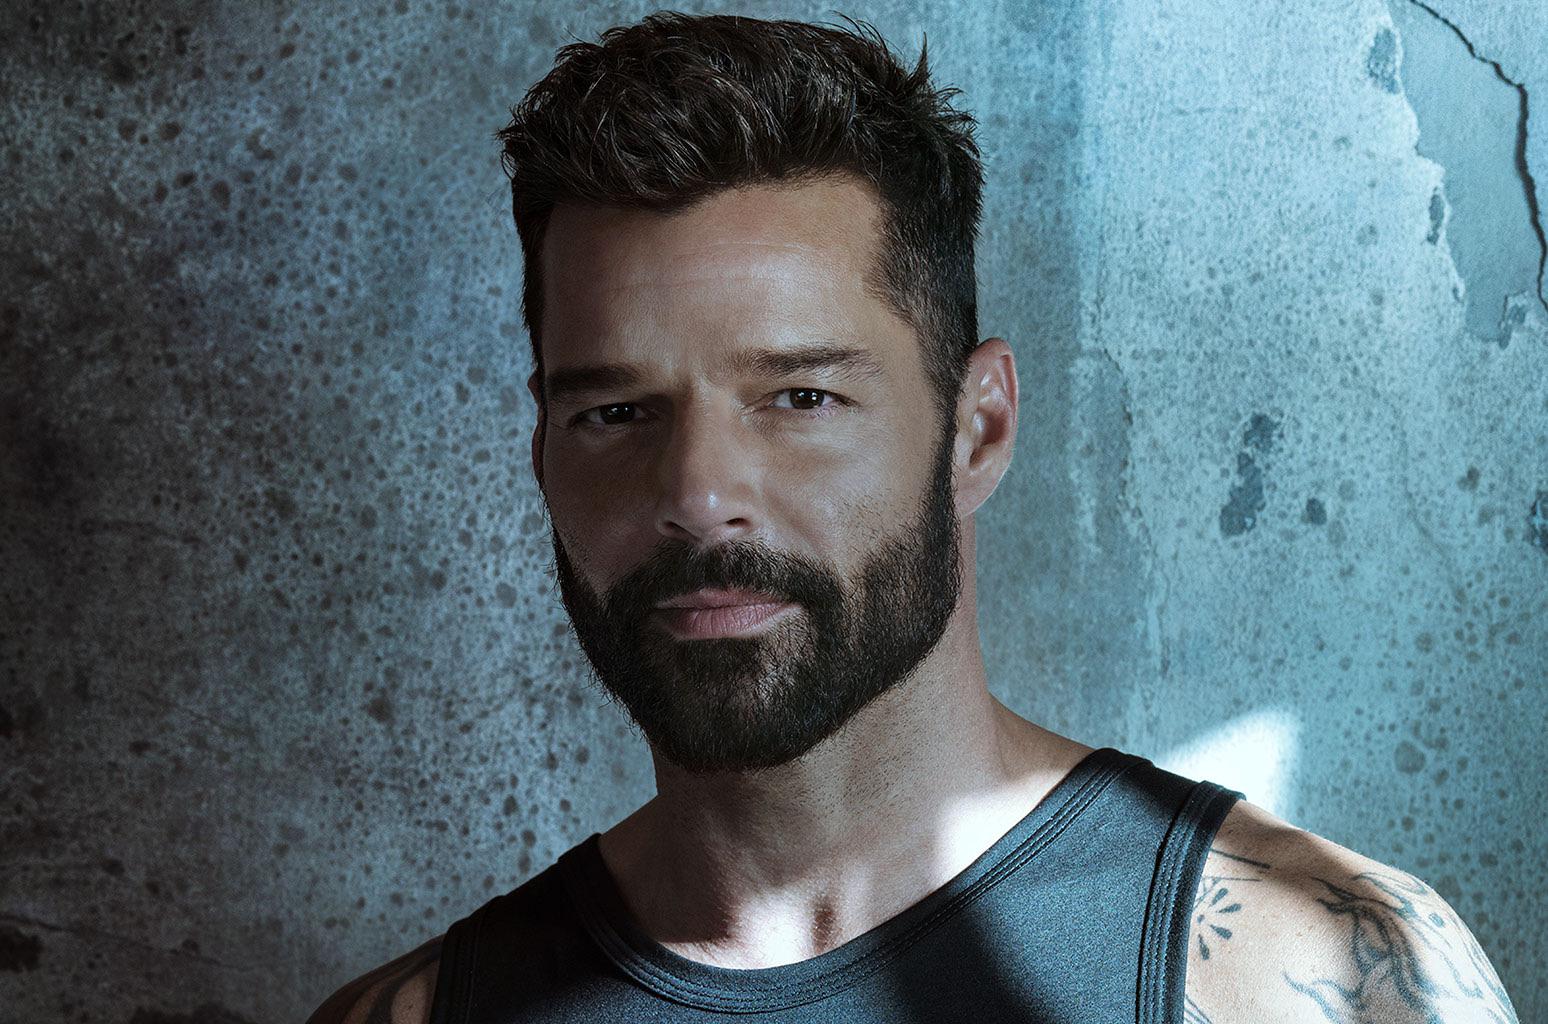 Ricky Martin is the most handsome man in the world